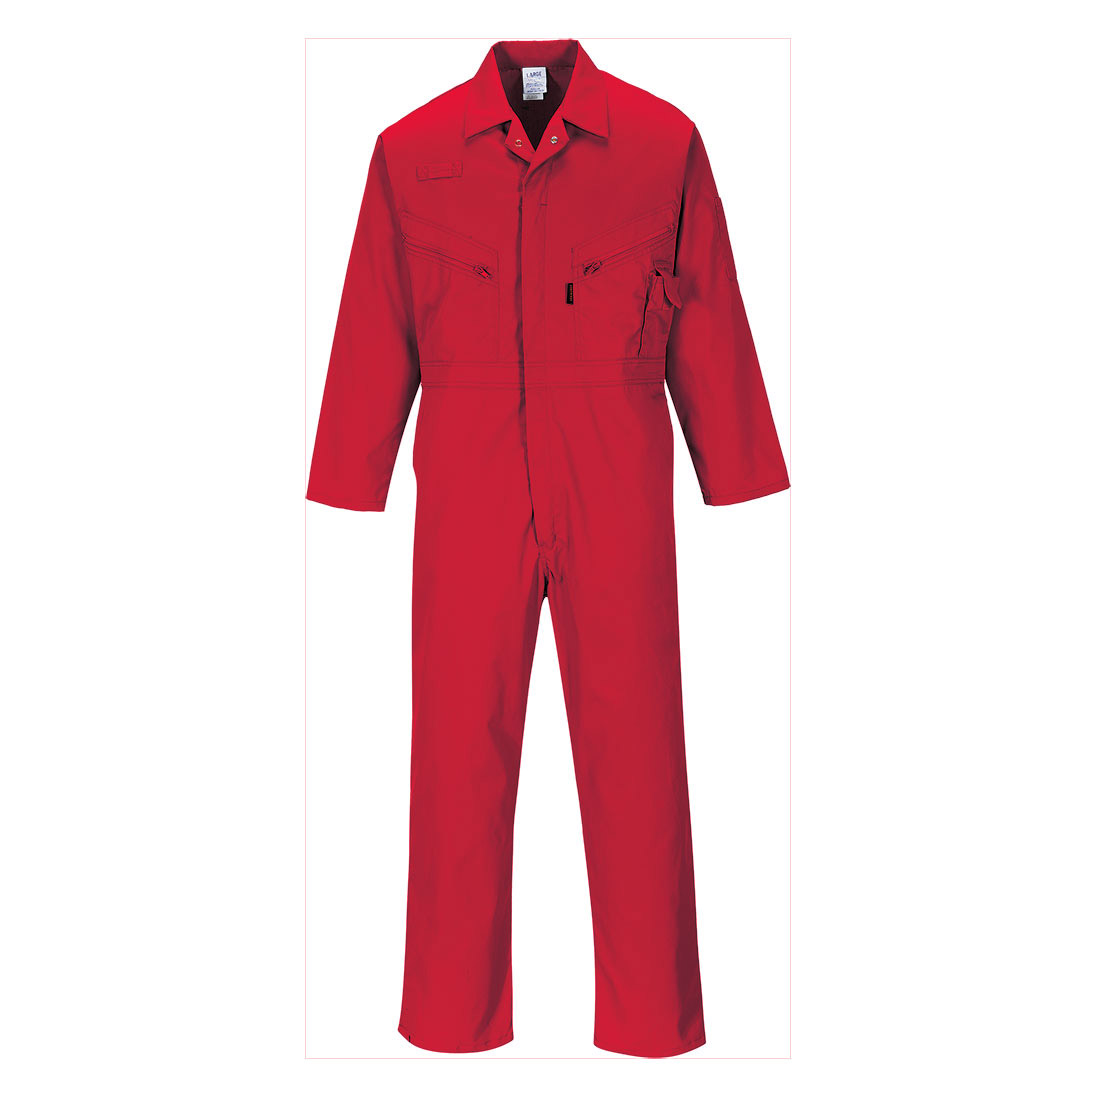 Top Quality Pre-Shrunk Comforable Standard Work Zip Coverall